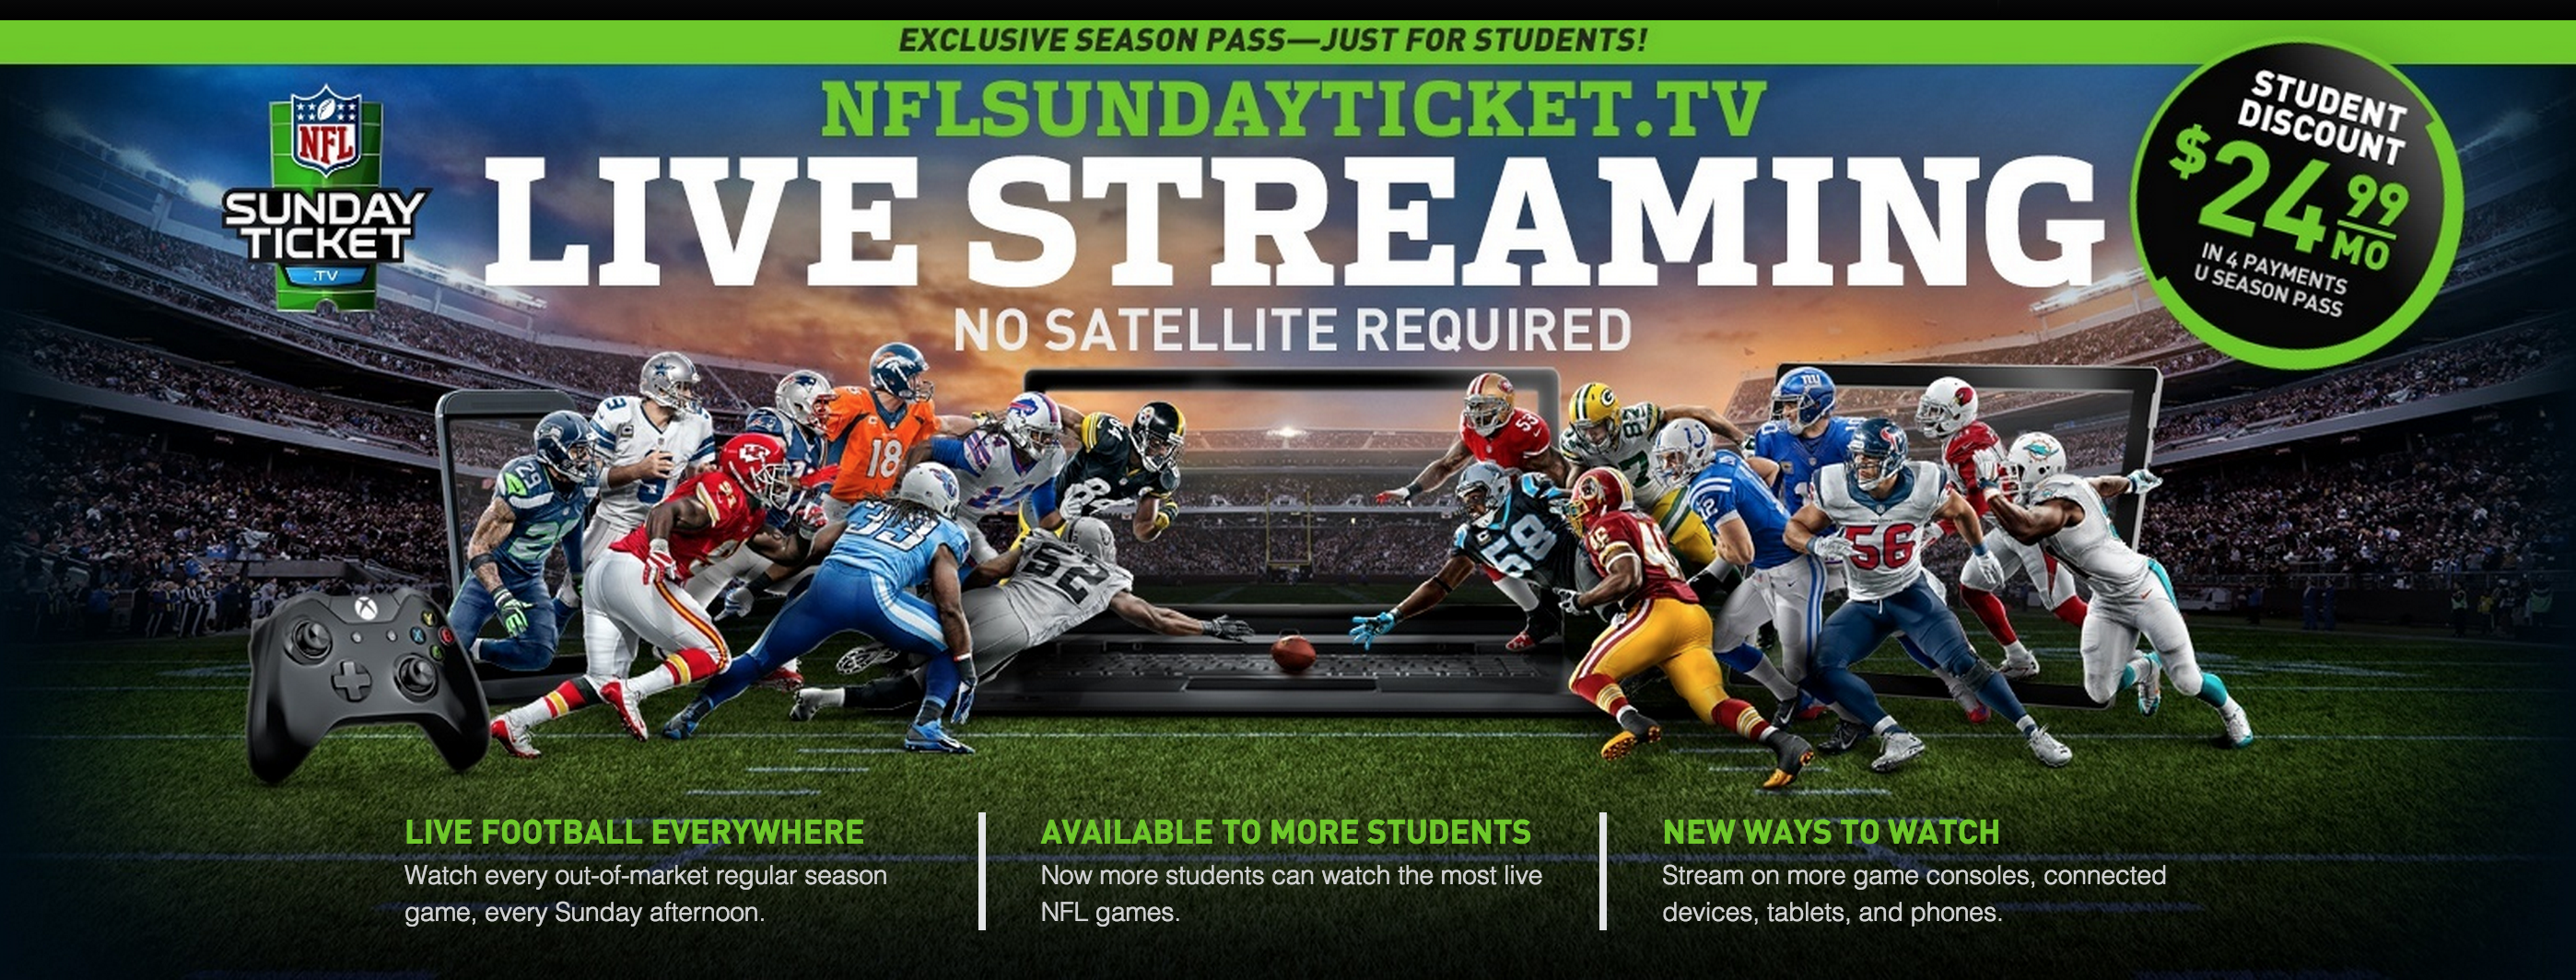 Stream nearly every NFL game for $100 w/ an eligible .edu email address  (Reg. $359)